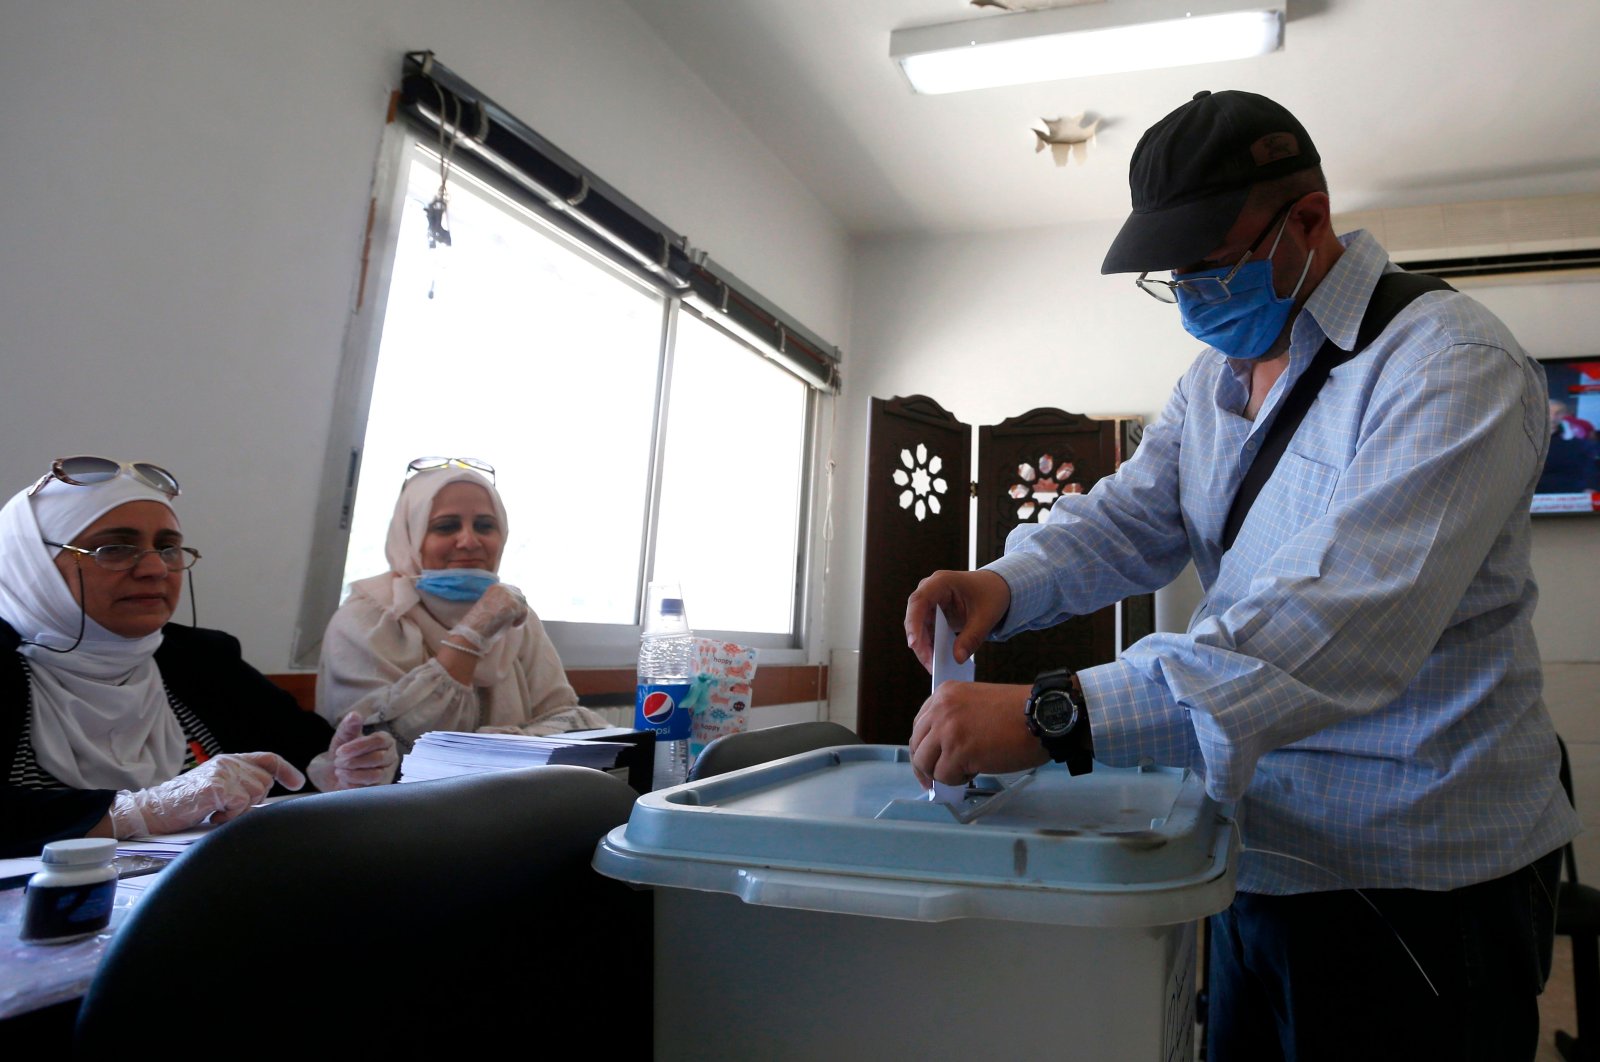 A man casts his ballot at a voting station during the parliamentary elections in Syria, Damascus, July 19, 2020. (AFP Photo)